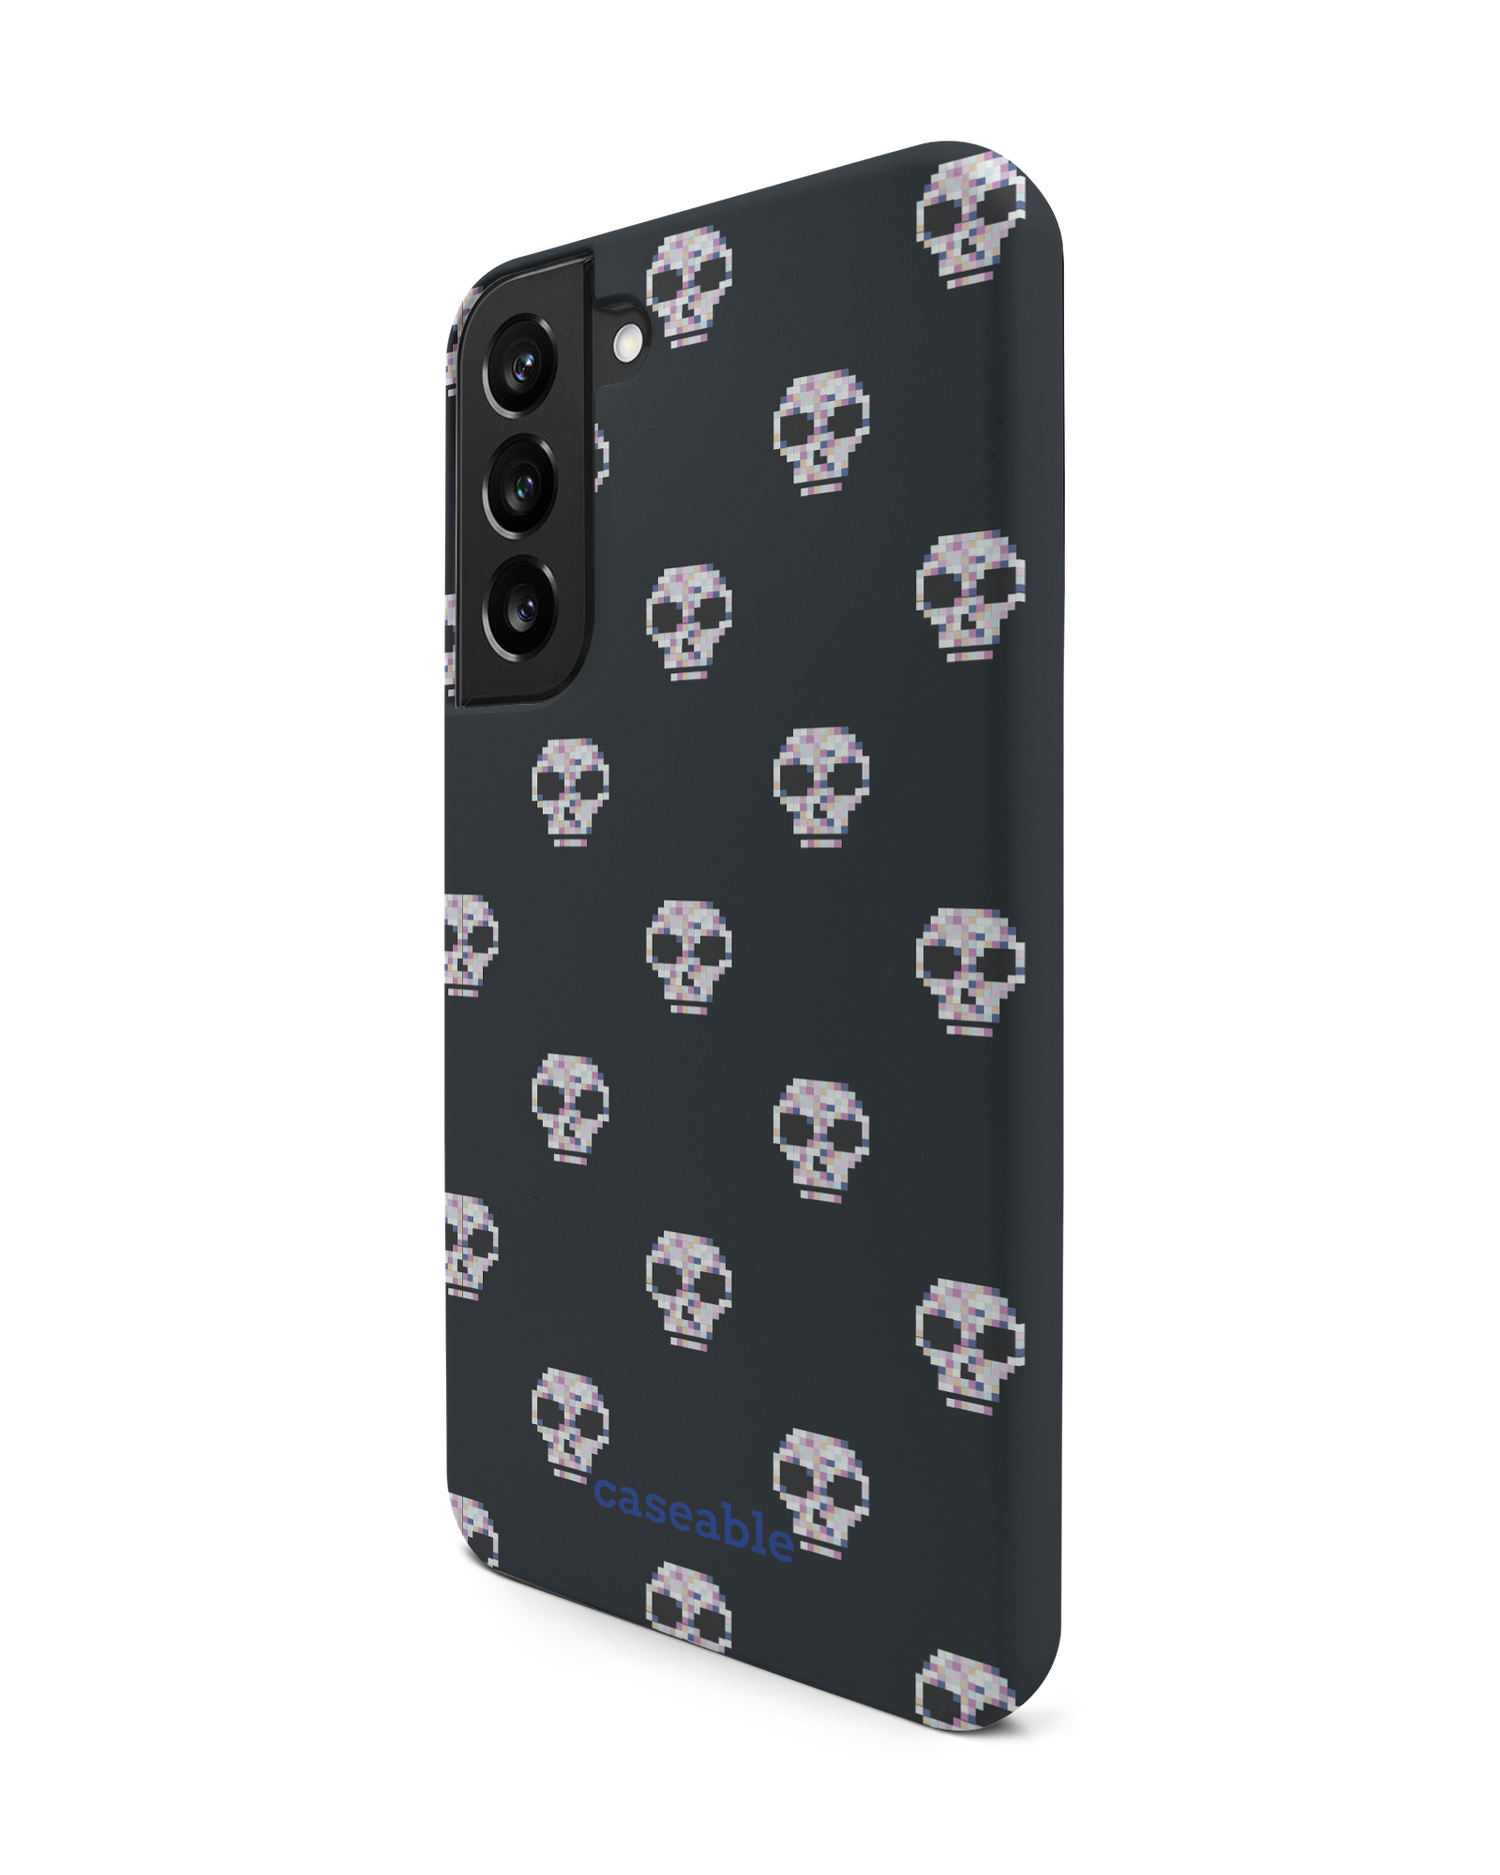 Digital Skulls Premium Phone Case Samsung Galaxy S22 Plus 5G: View from the right side